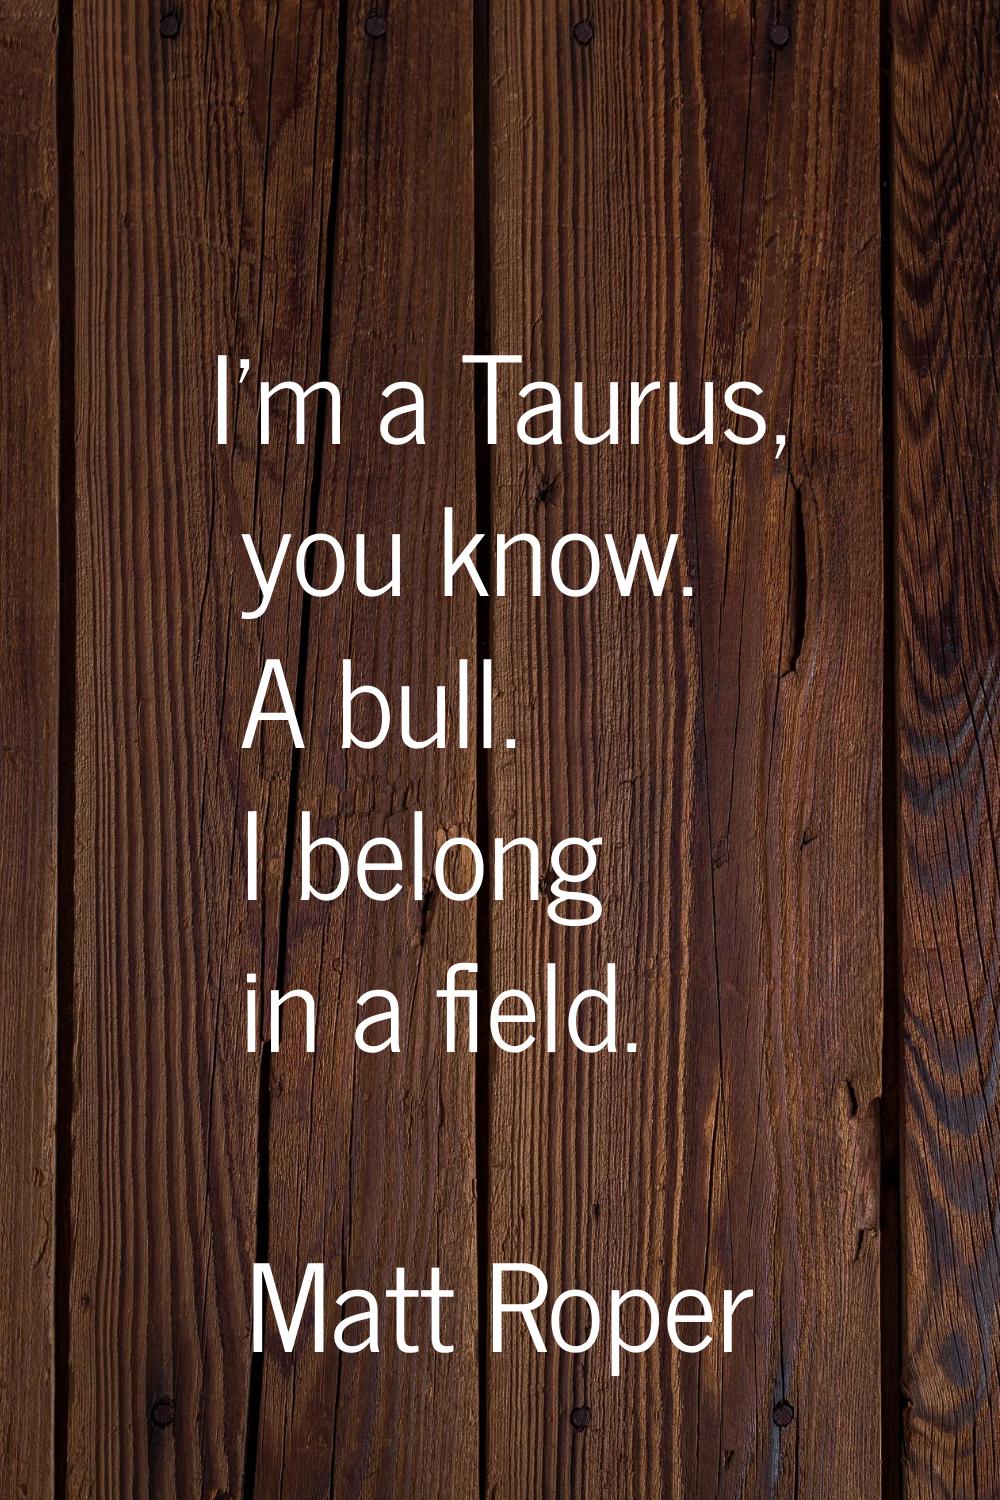 I'm a Taurus, you know. A bull. I belong in a field.